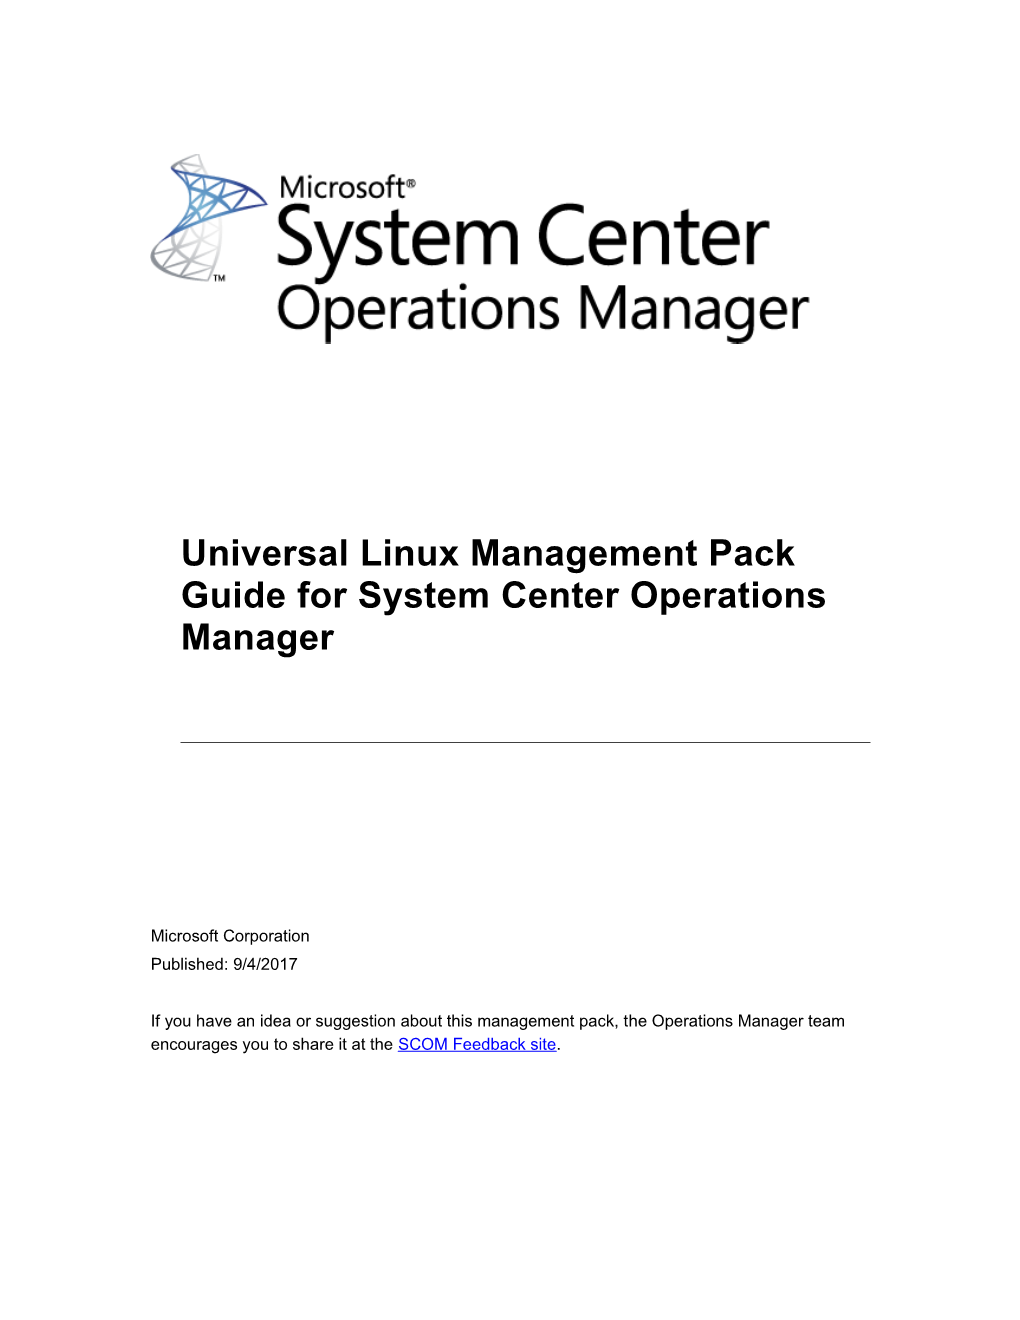 Universal Linux Management Pack Guide for System Center Operations Manager